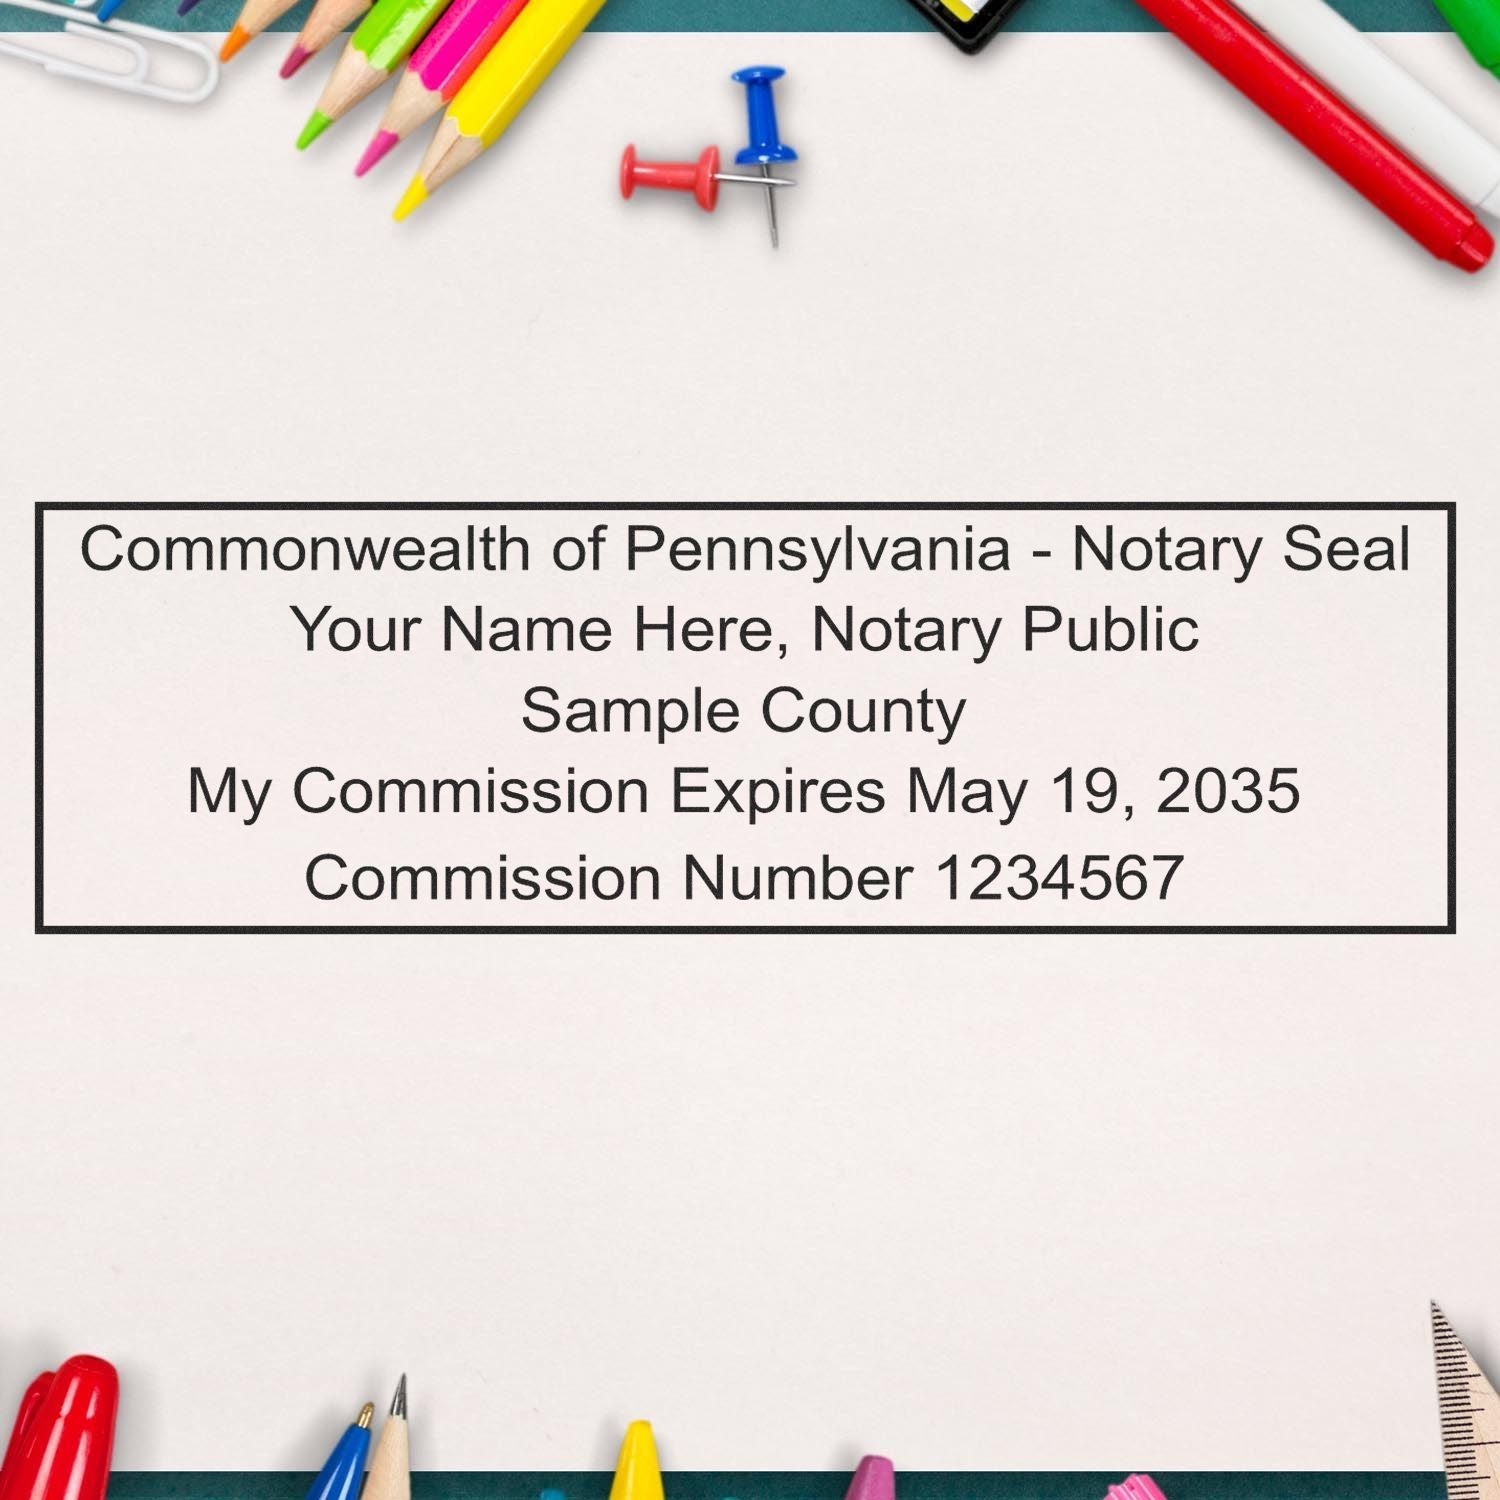 The main image for the MaxLight Premium Pre-Inked Pennsylvania Rectangular Notarial Stamp depicting a sample of the imprint and electronic files